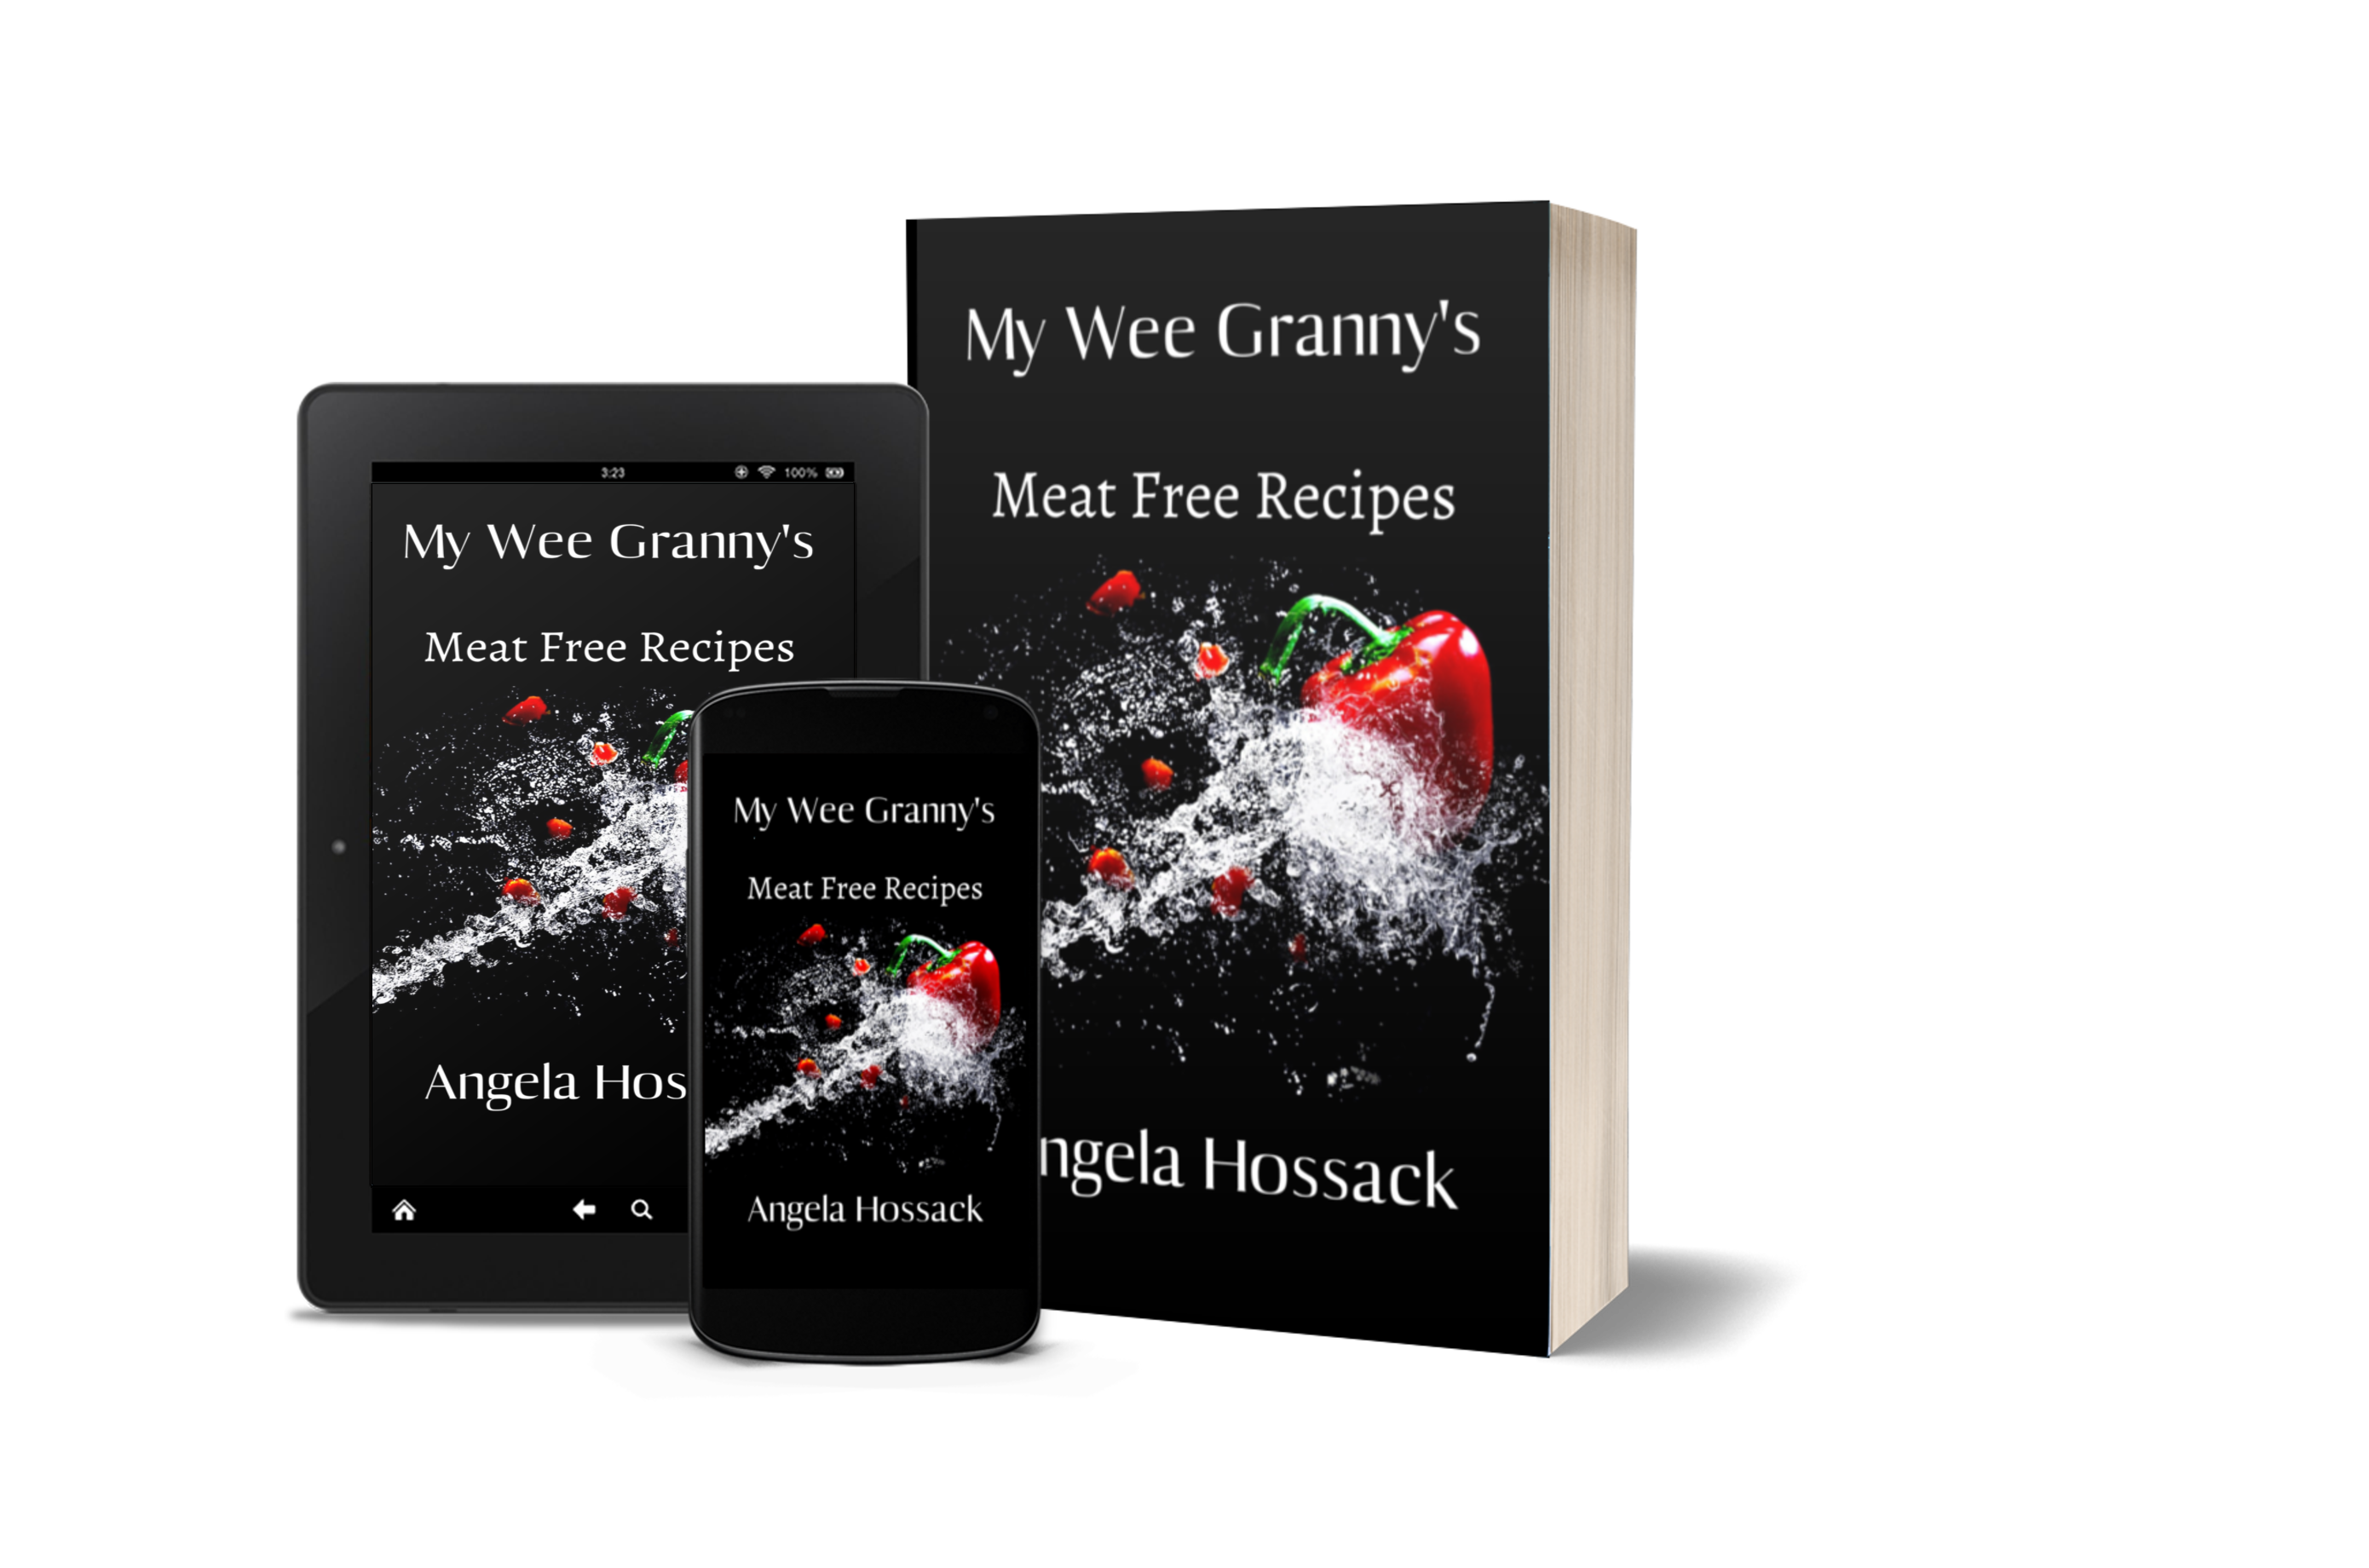 My Wee Granny's Meat Free Recipes: A Selection of Home-Style Vegetarian Dishes